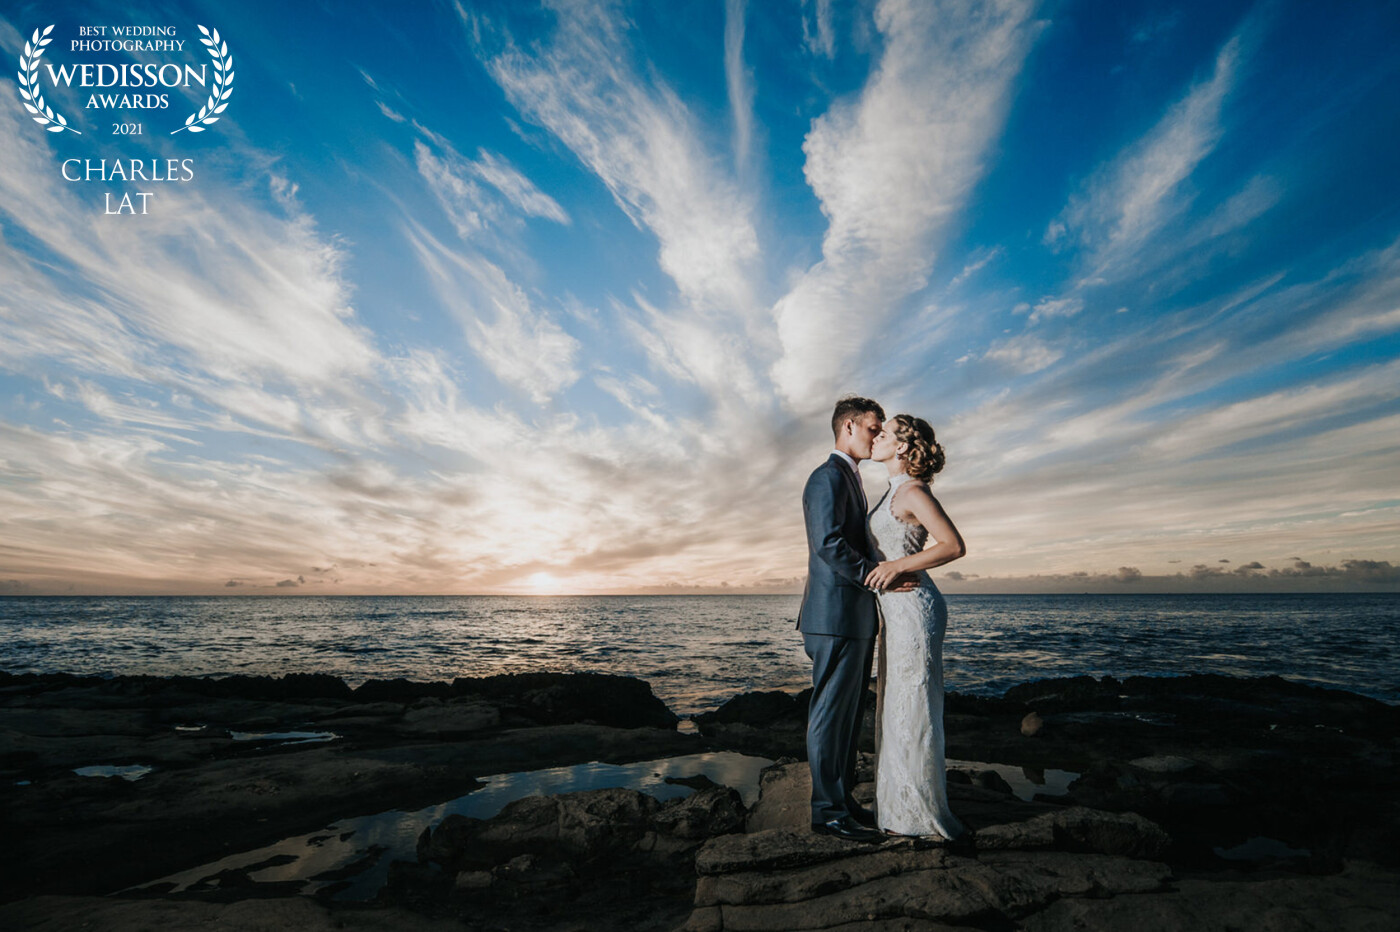 After a daytime Hawaii wedding and reception, Paul and Stephanie snuck away to a quiet beach on Oahu to share a private moment and we were able to capture this beautiful and special moment between them.